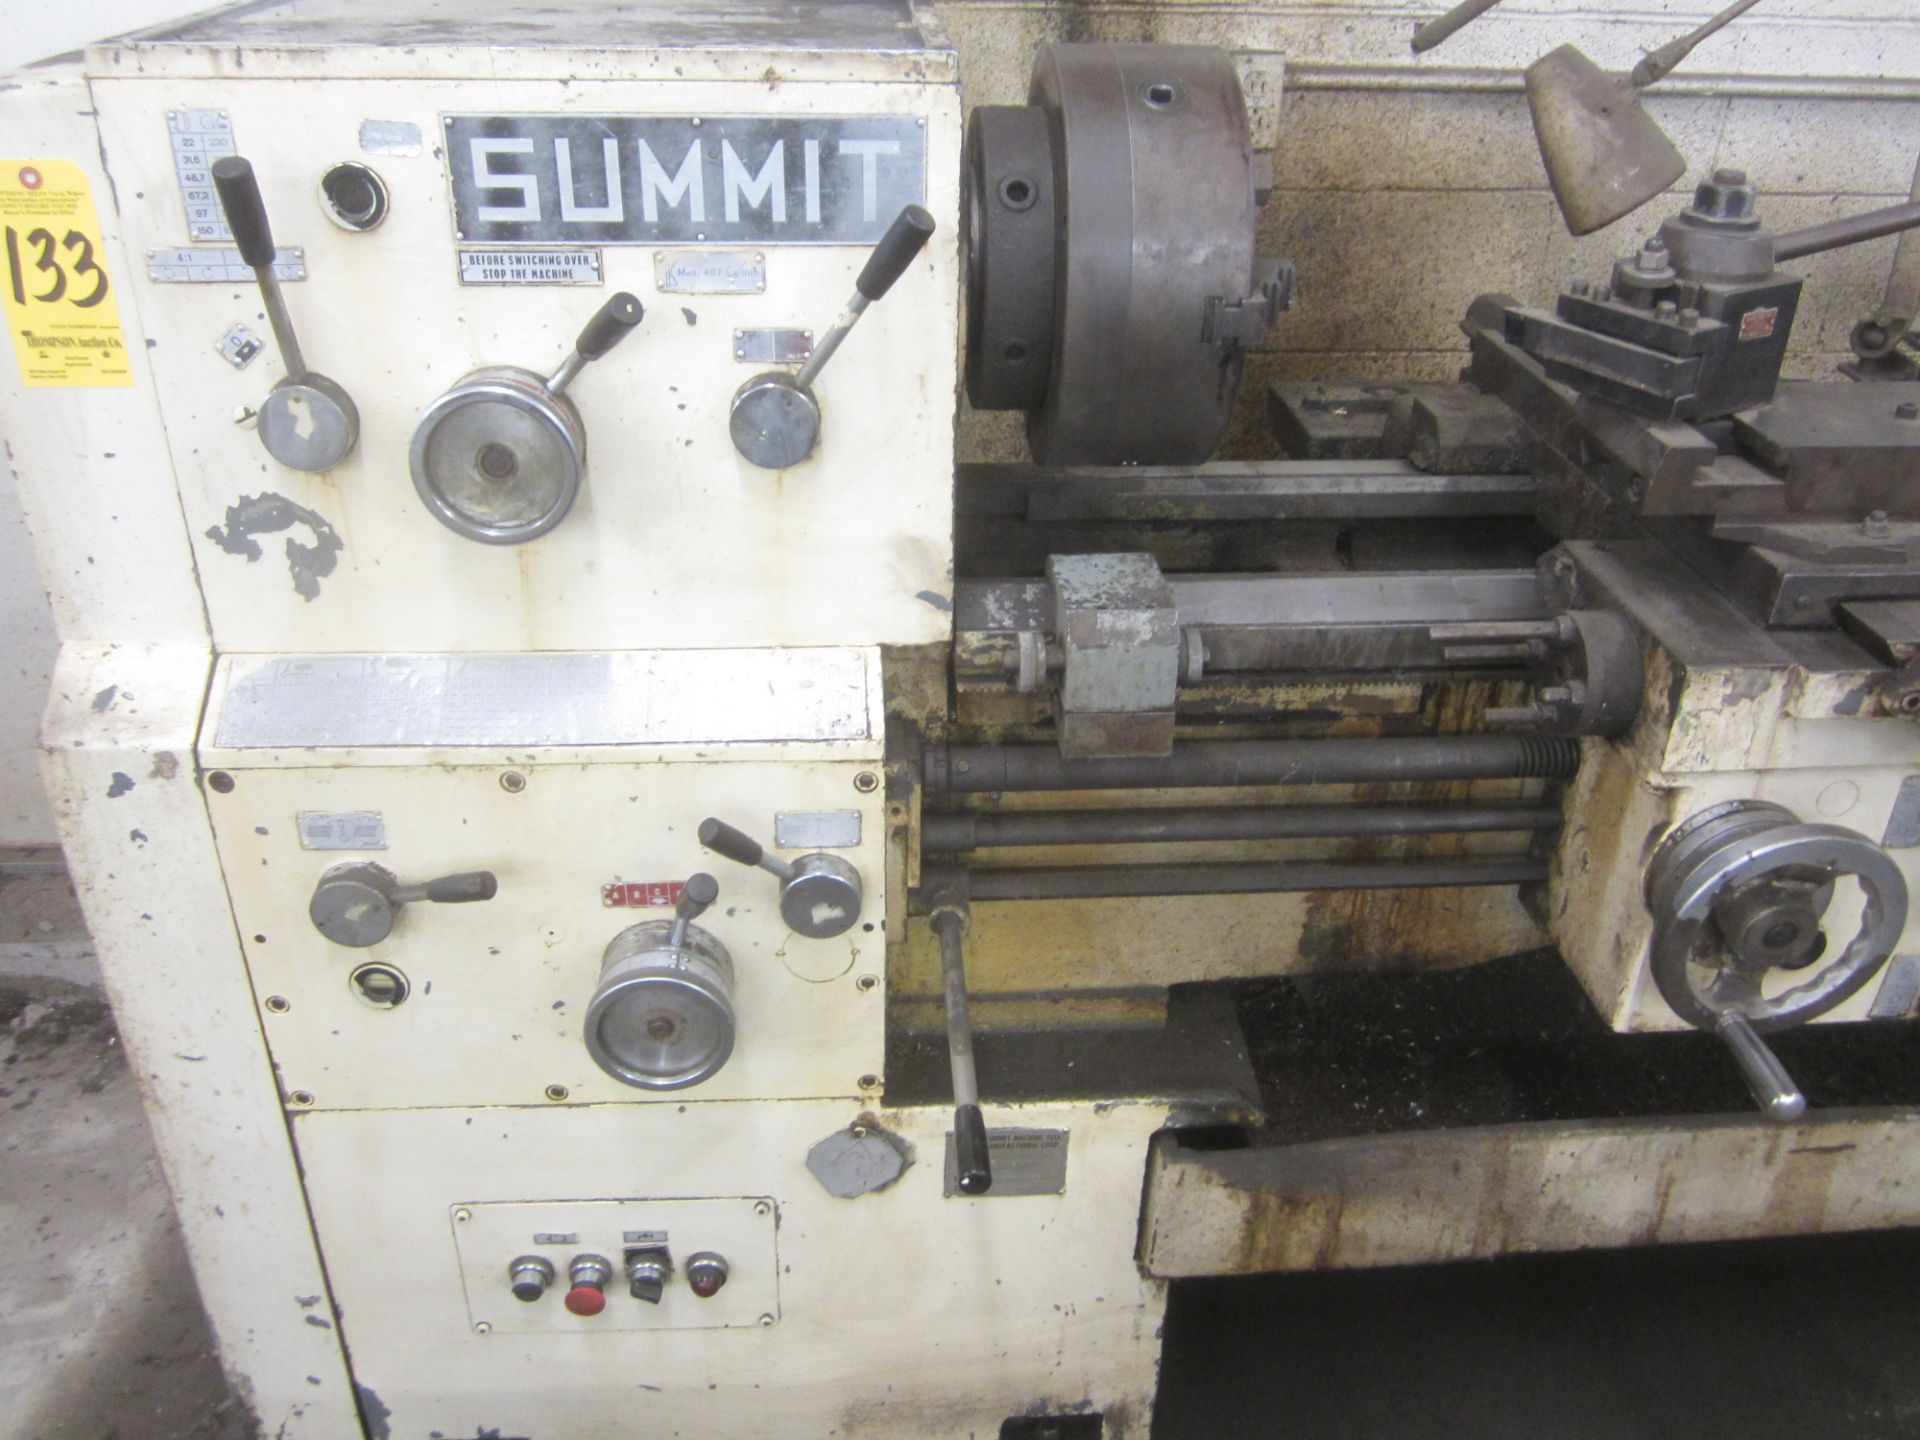 Summit Model 19-4 X 80 Toolroom Lathe, s/n 3602, 19" X 80" Capacity, 4" Spindle Hole, Inch/Metric, - Image 3 of 10